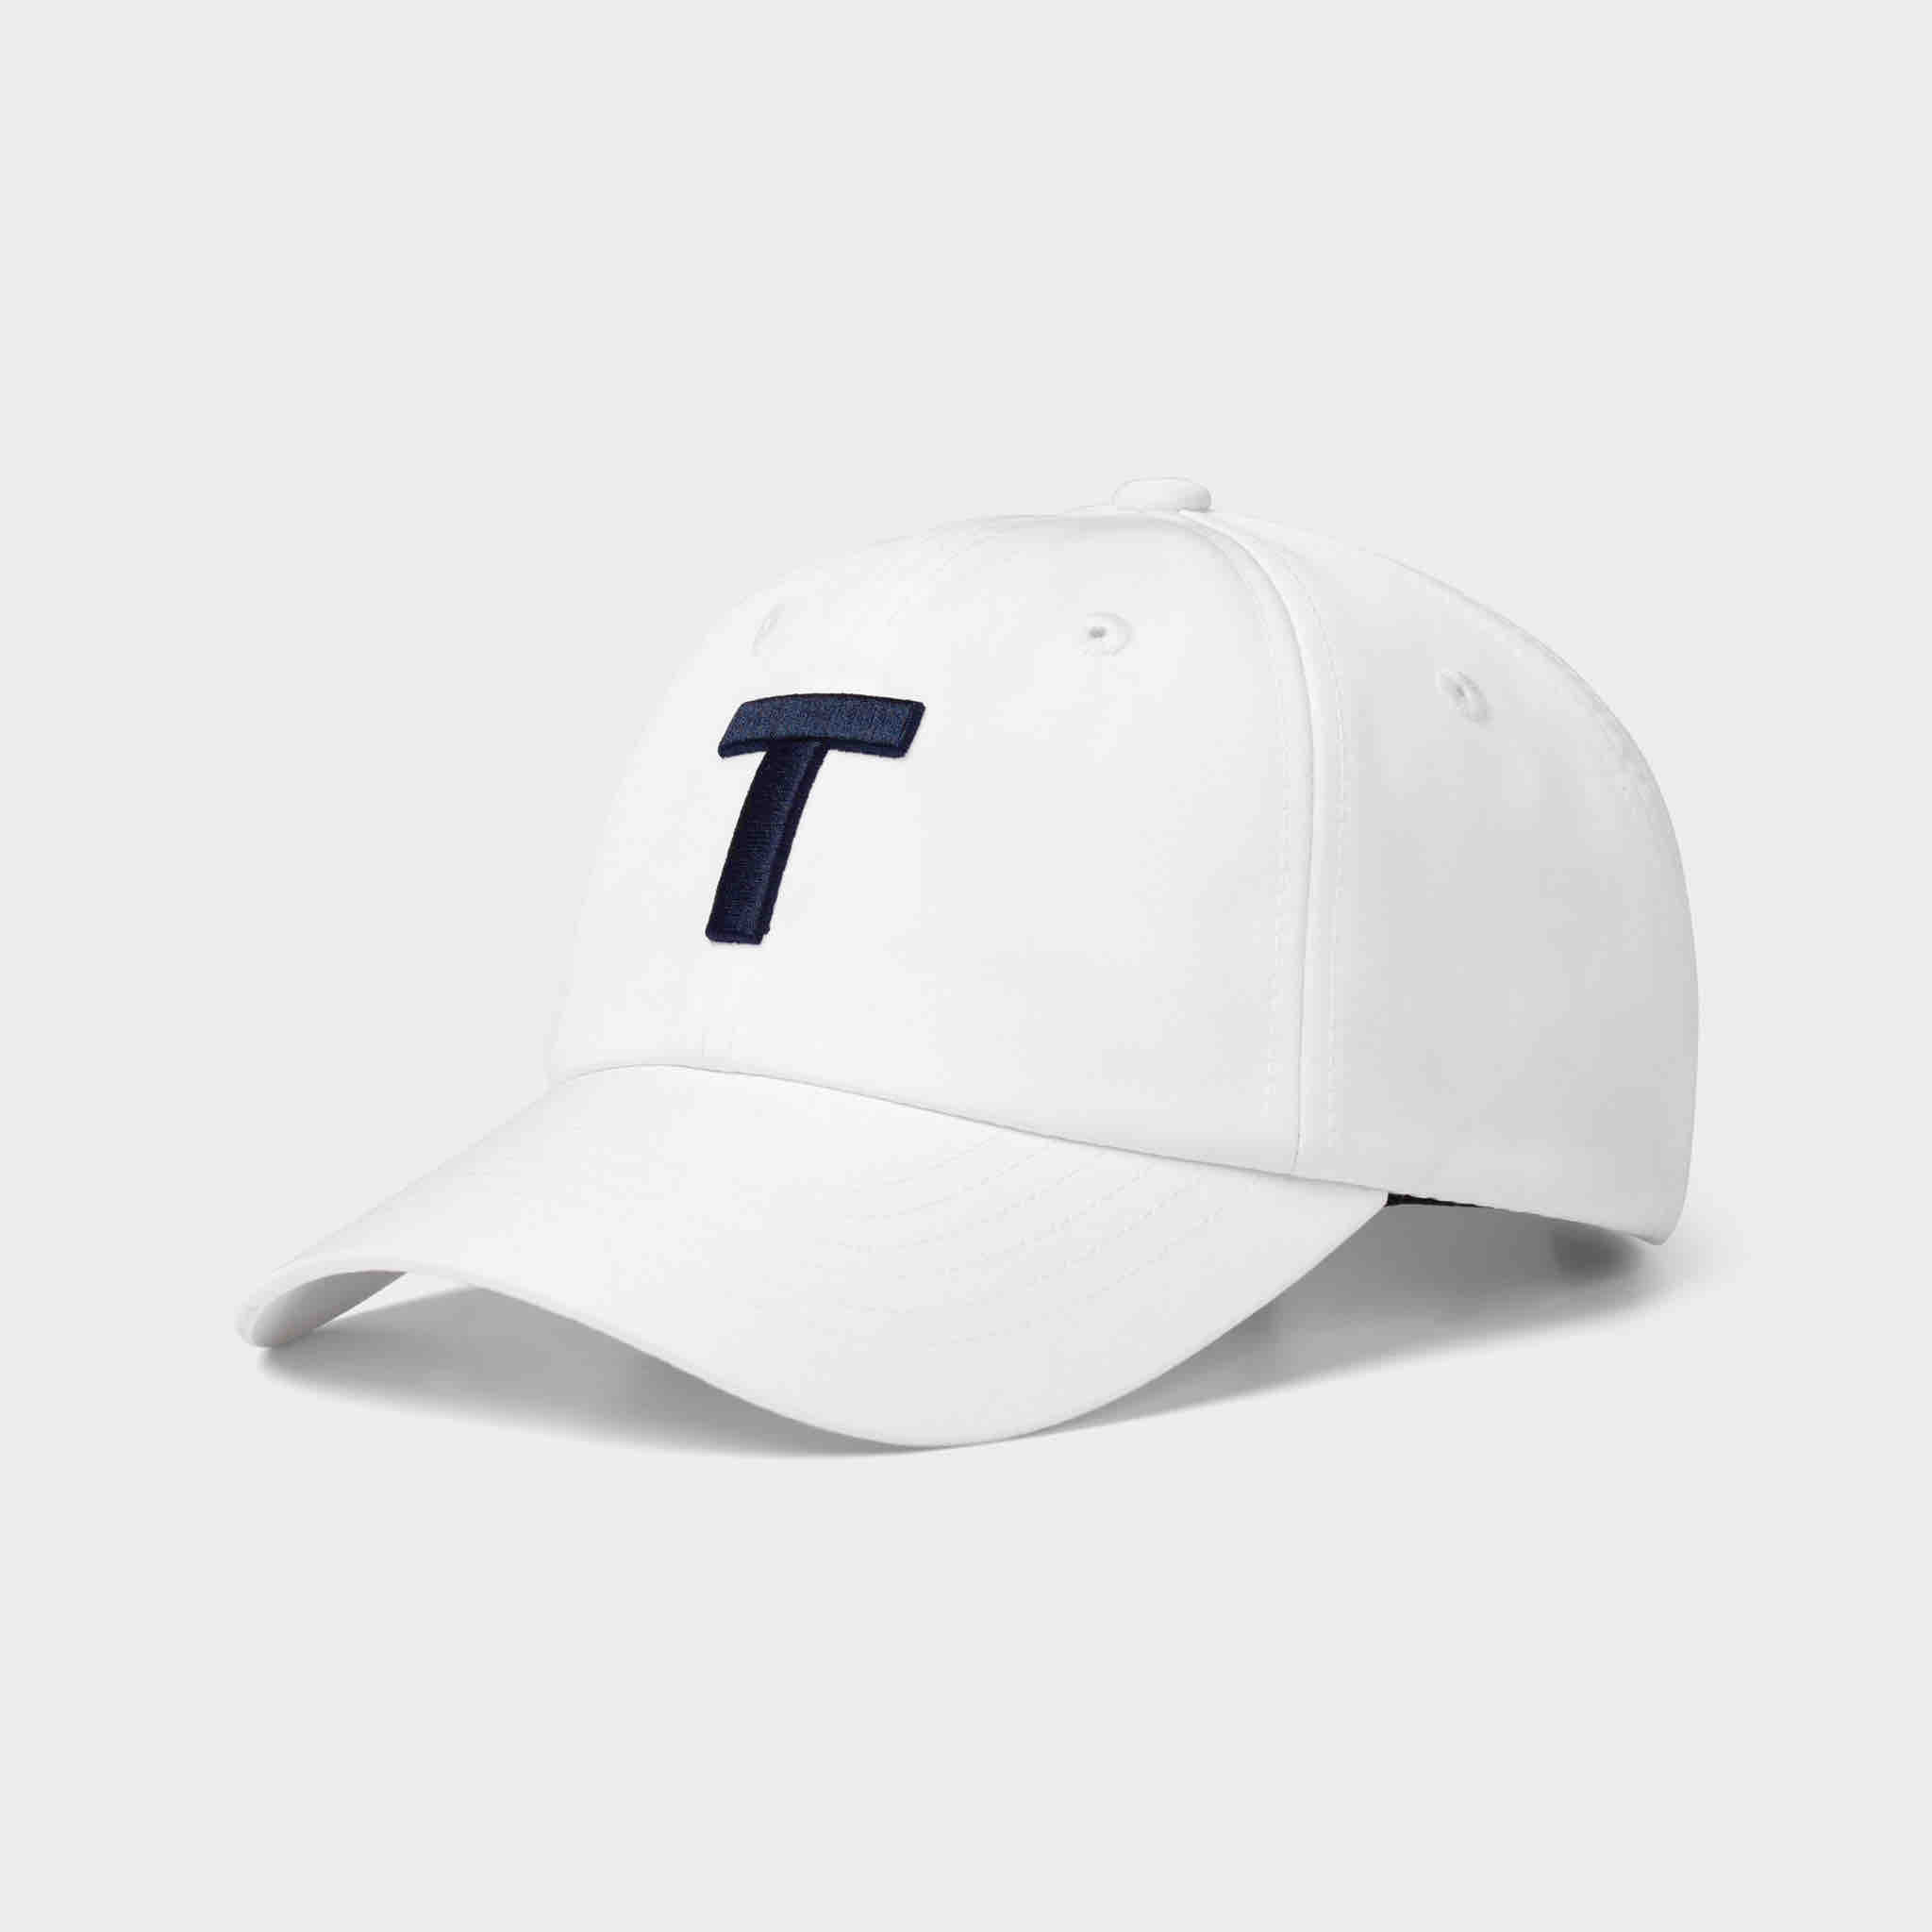 Adjustable Drawstring Vented Baseball Caps Quick Dry, Breathable